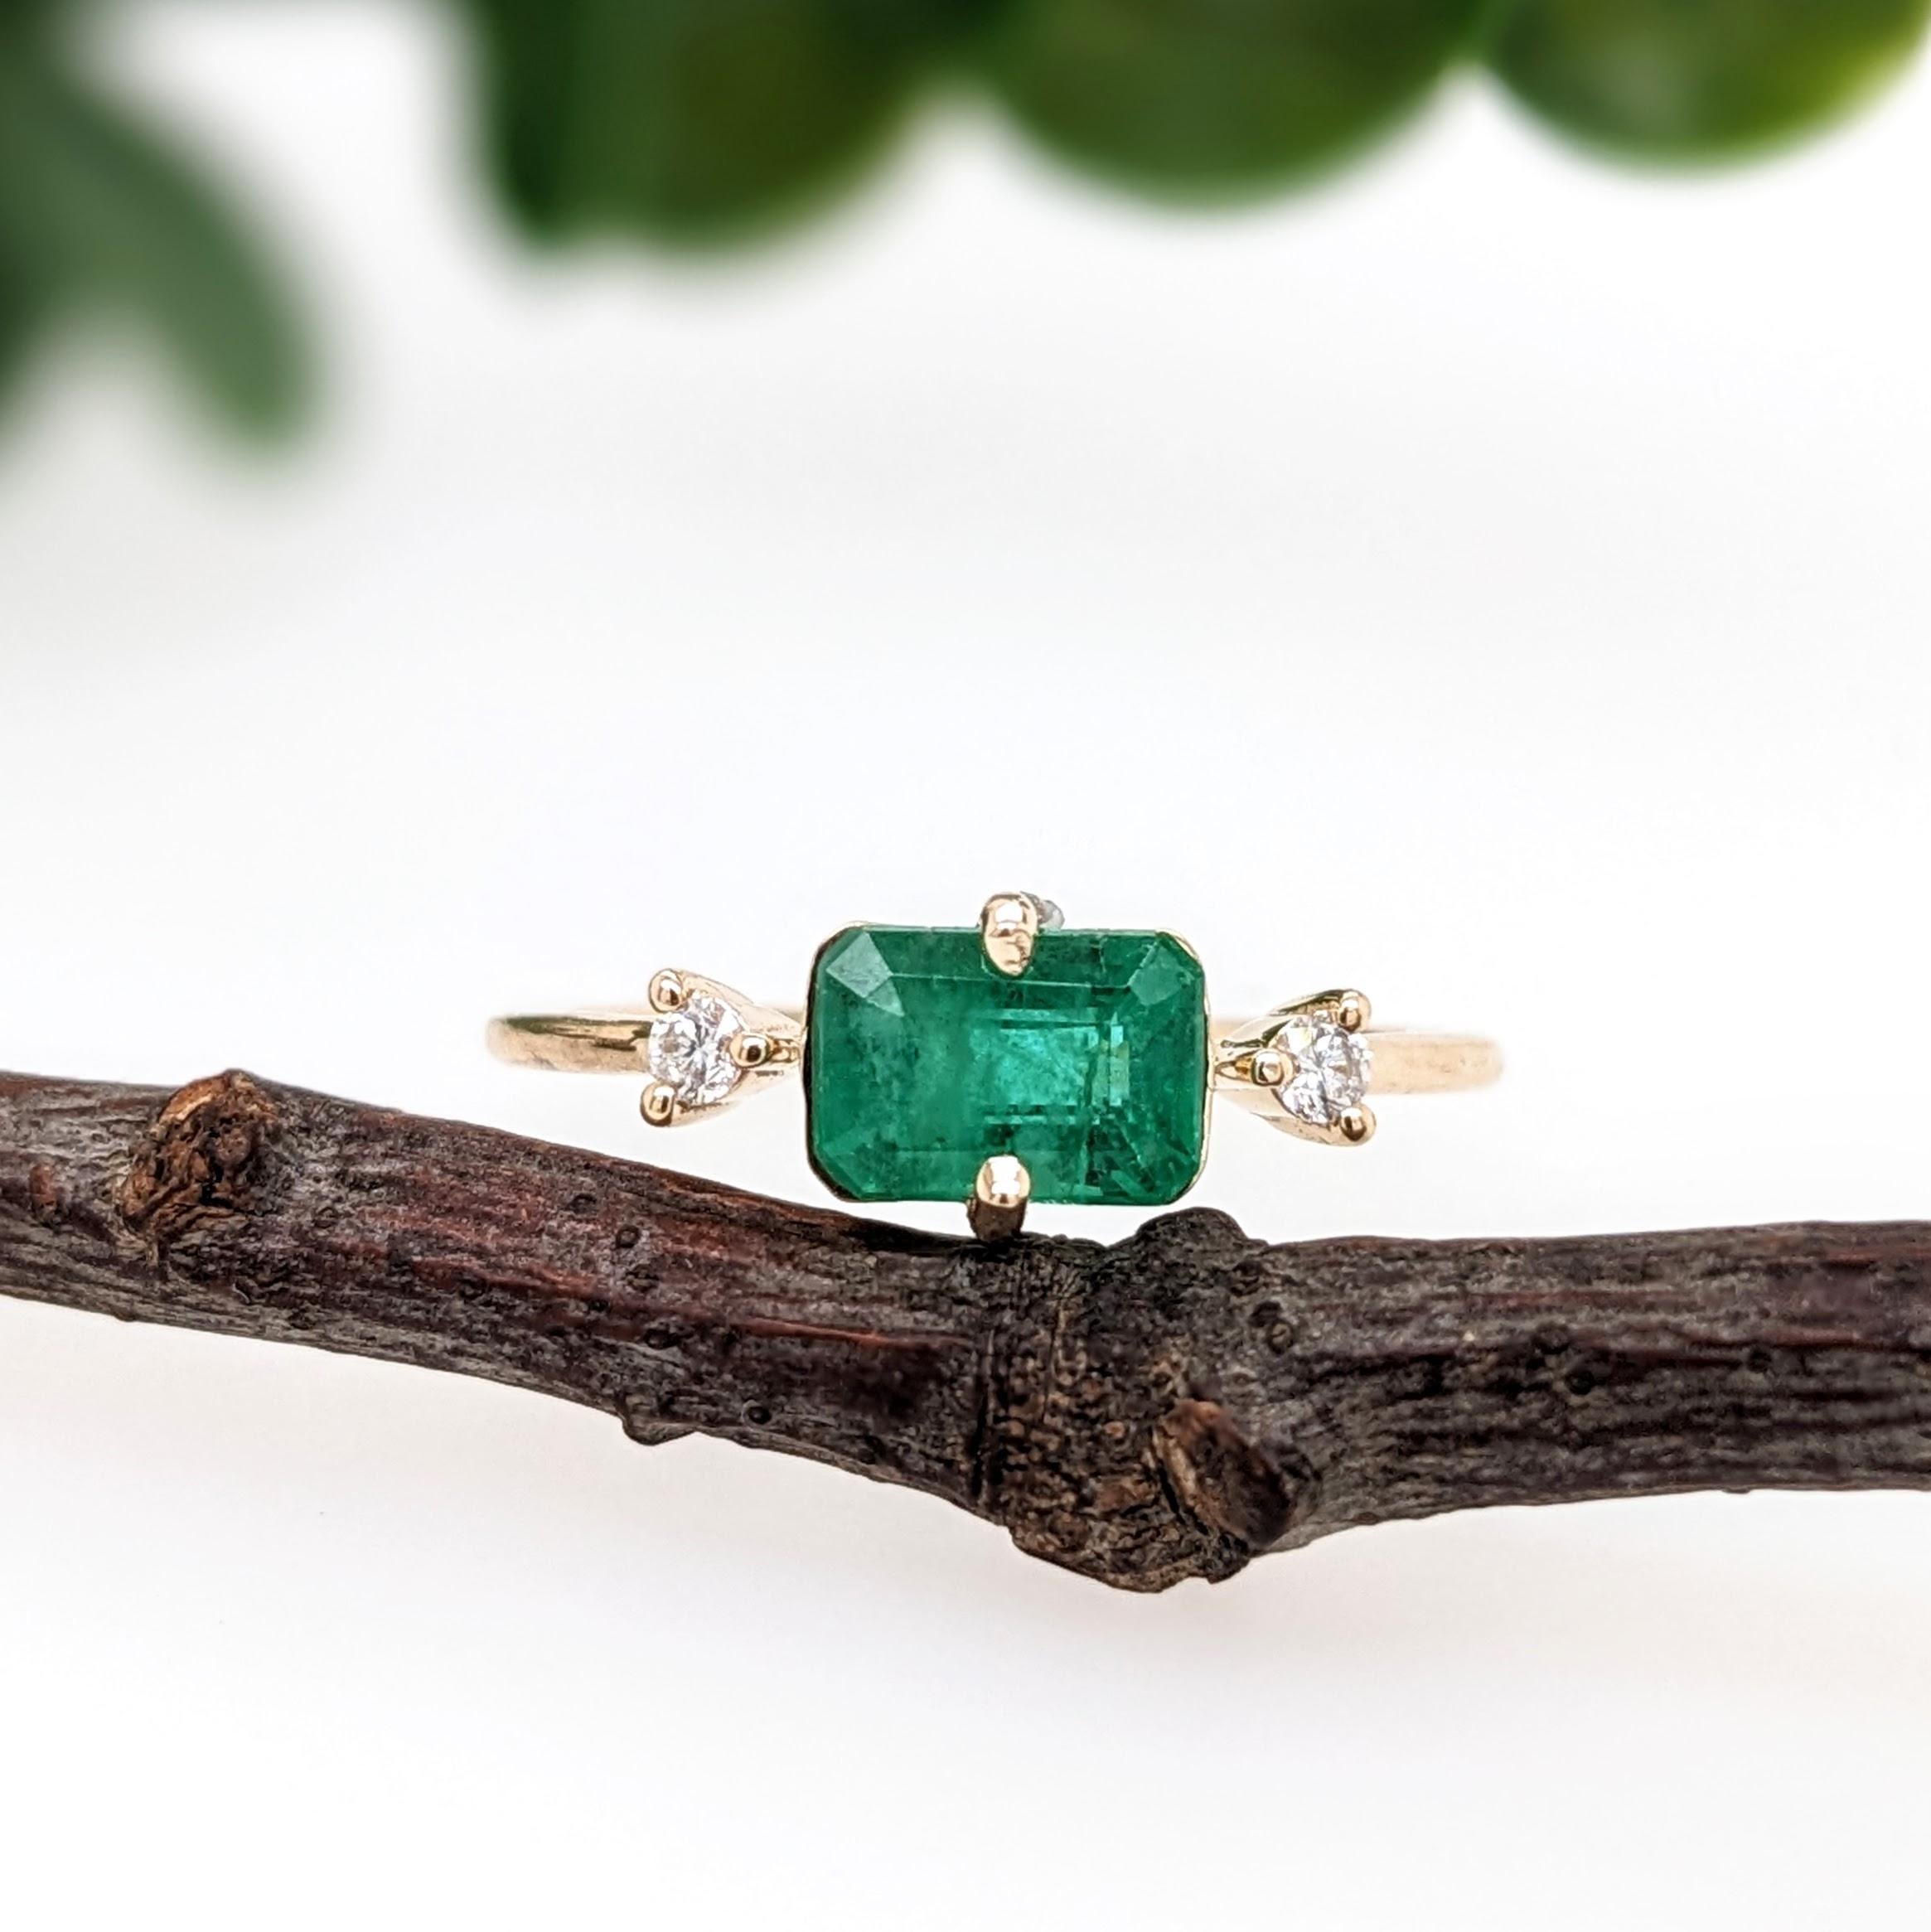 This ring features a beautiful emerald in a cute NNJ Designs ring setting with sparkling natural diamonds all set in 14k yellow gold. A gorgeous modern look that's both geometric and dainty!

Specifications:

Item Type: Ring
Centre